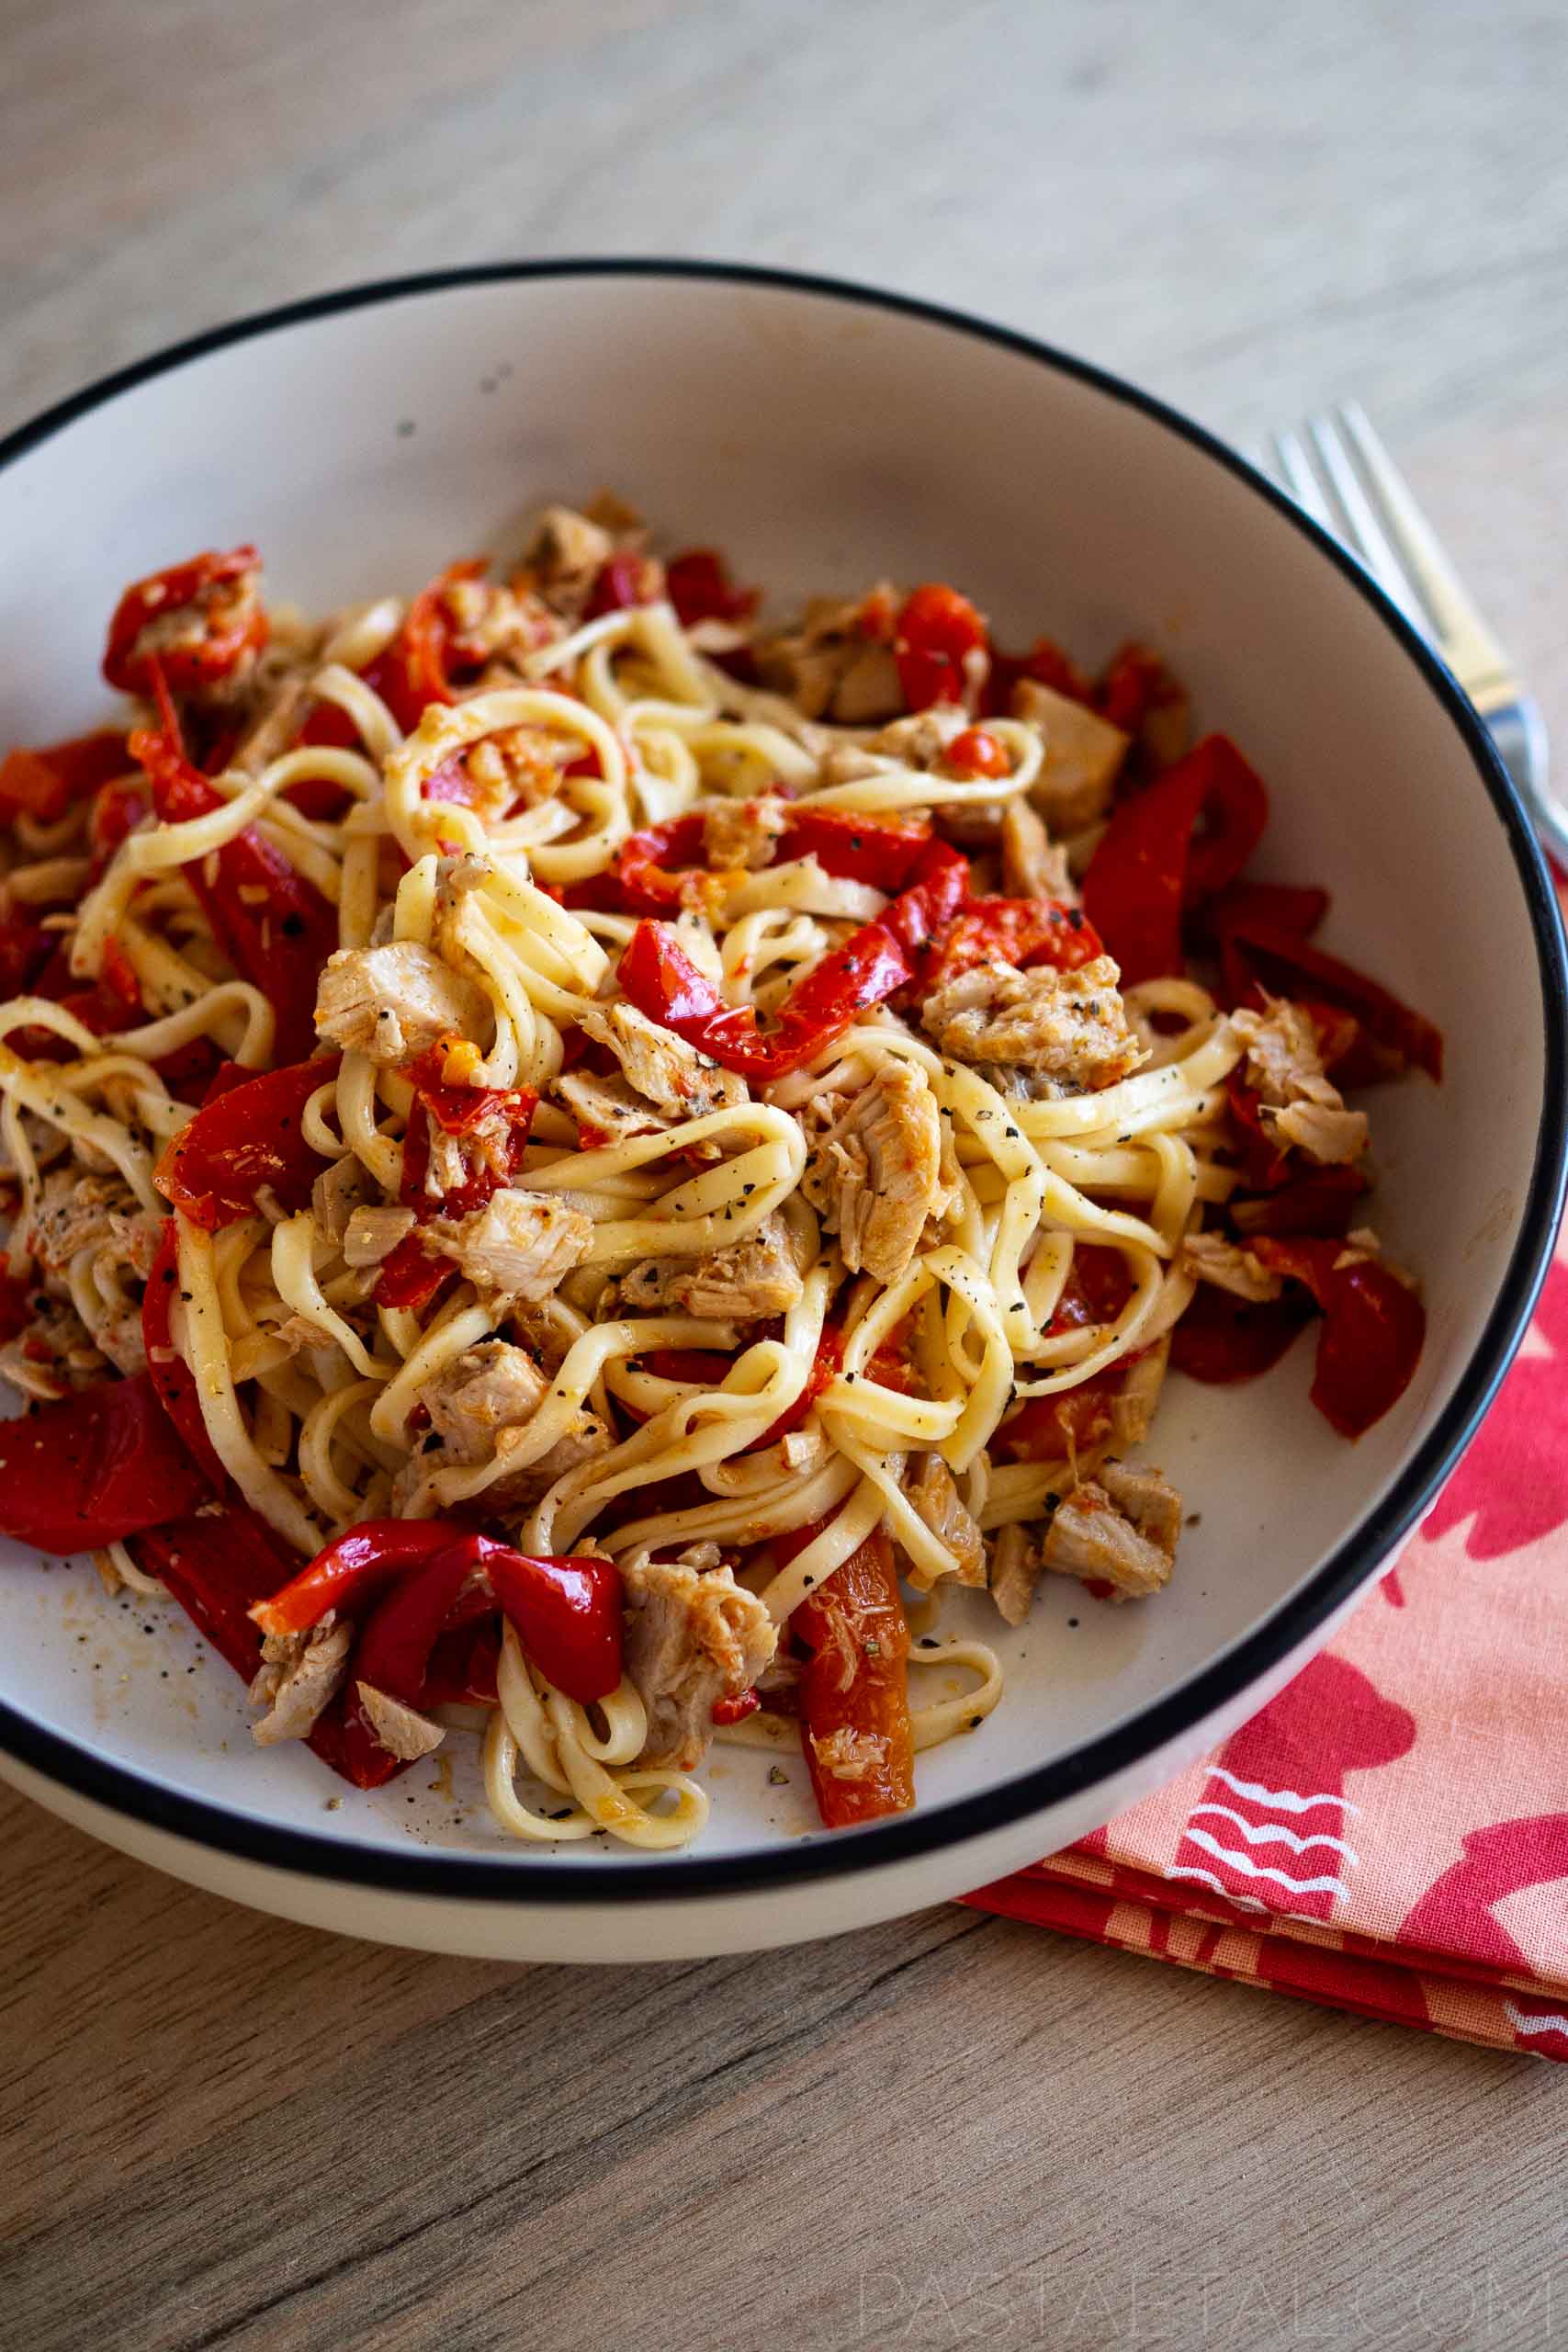 https://pastaetal.com/wp-content/uploads/2021/04/close-up-of-spaghetti-alla-chitarra-with-capsicum-and-homemade-tuna-in-oil-on-a-chopping-board.jpg